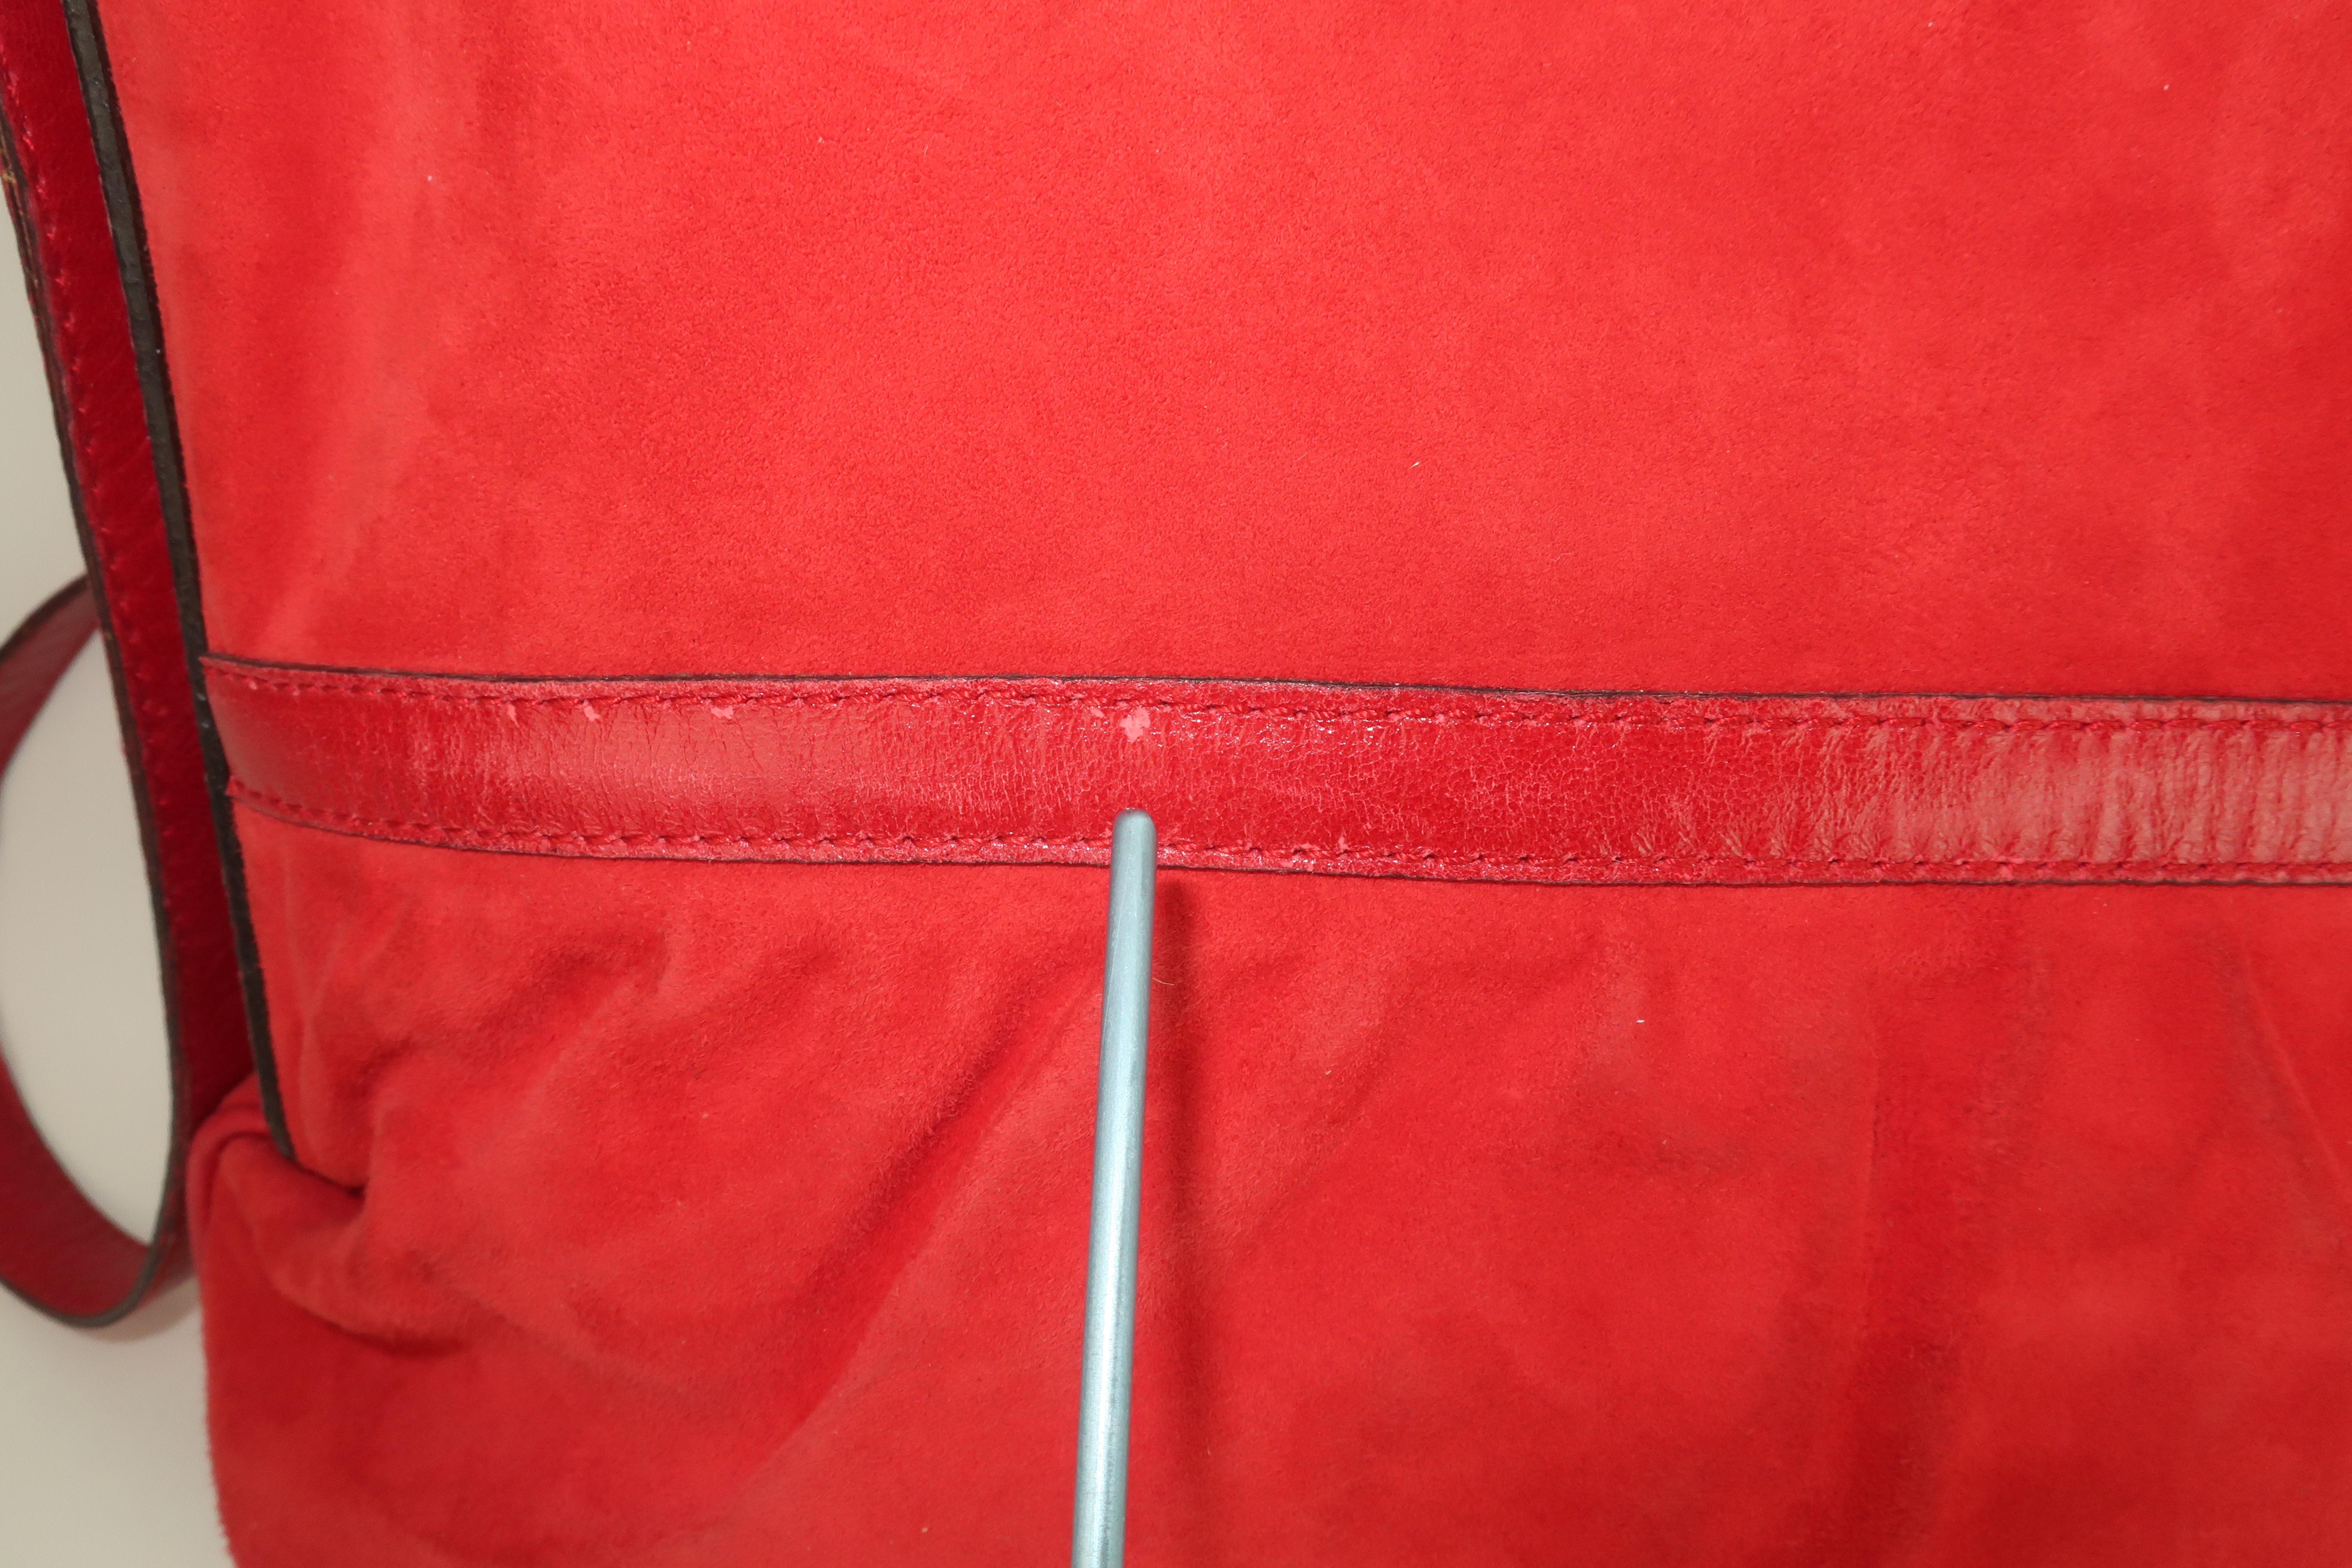 Sergio Rossi Red Suede Leather Handbag, 1970's For Sale 8